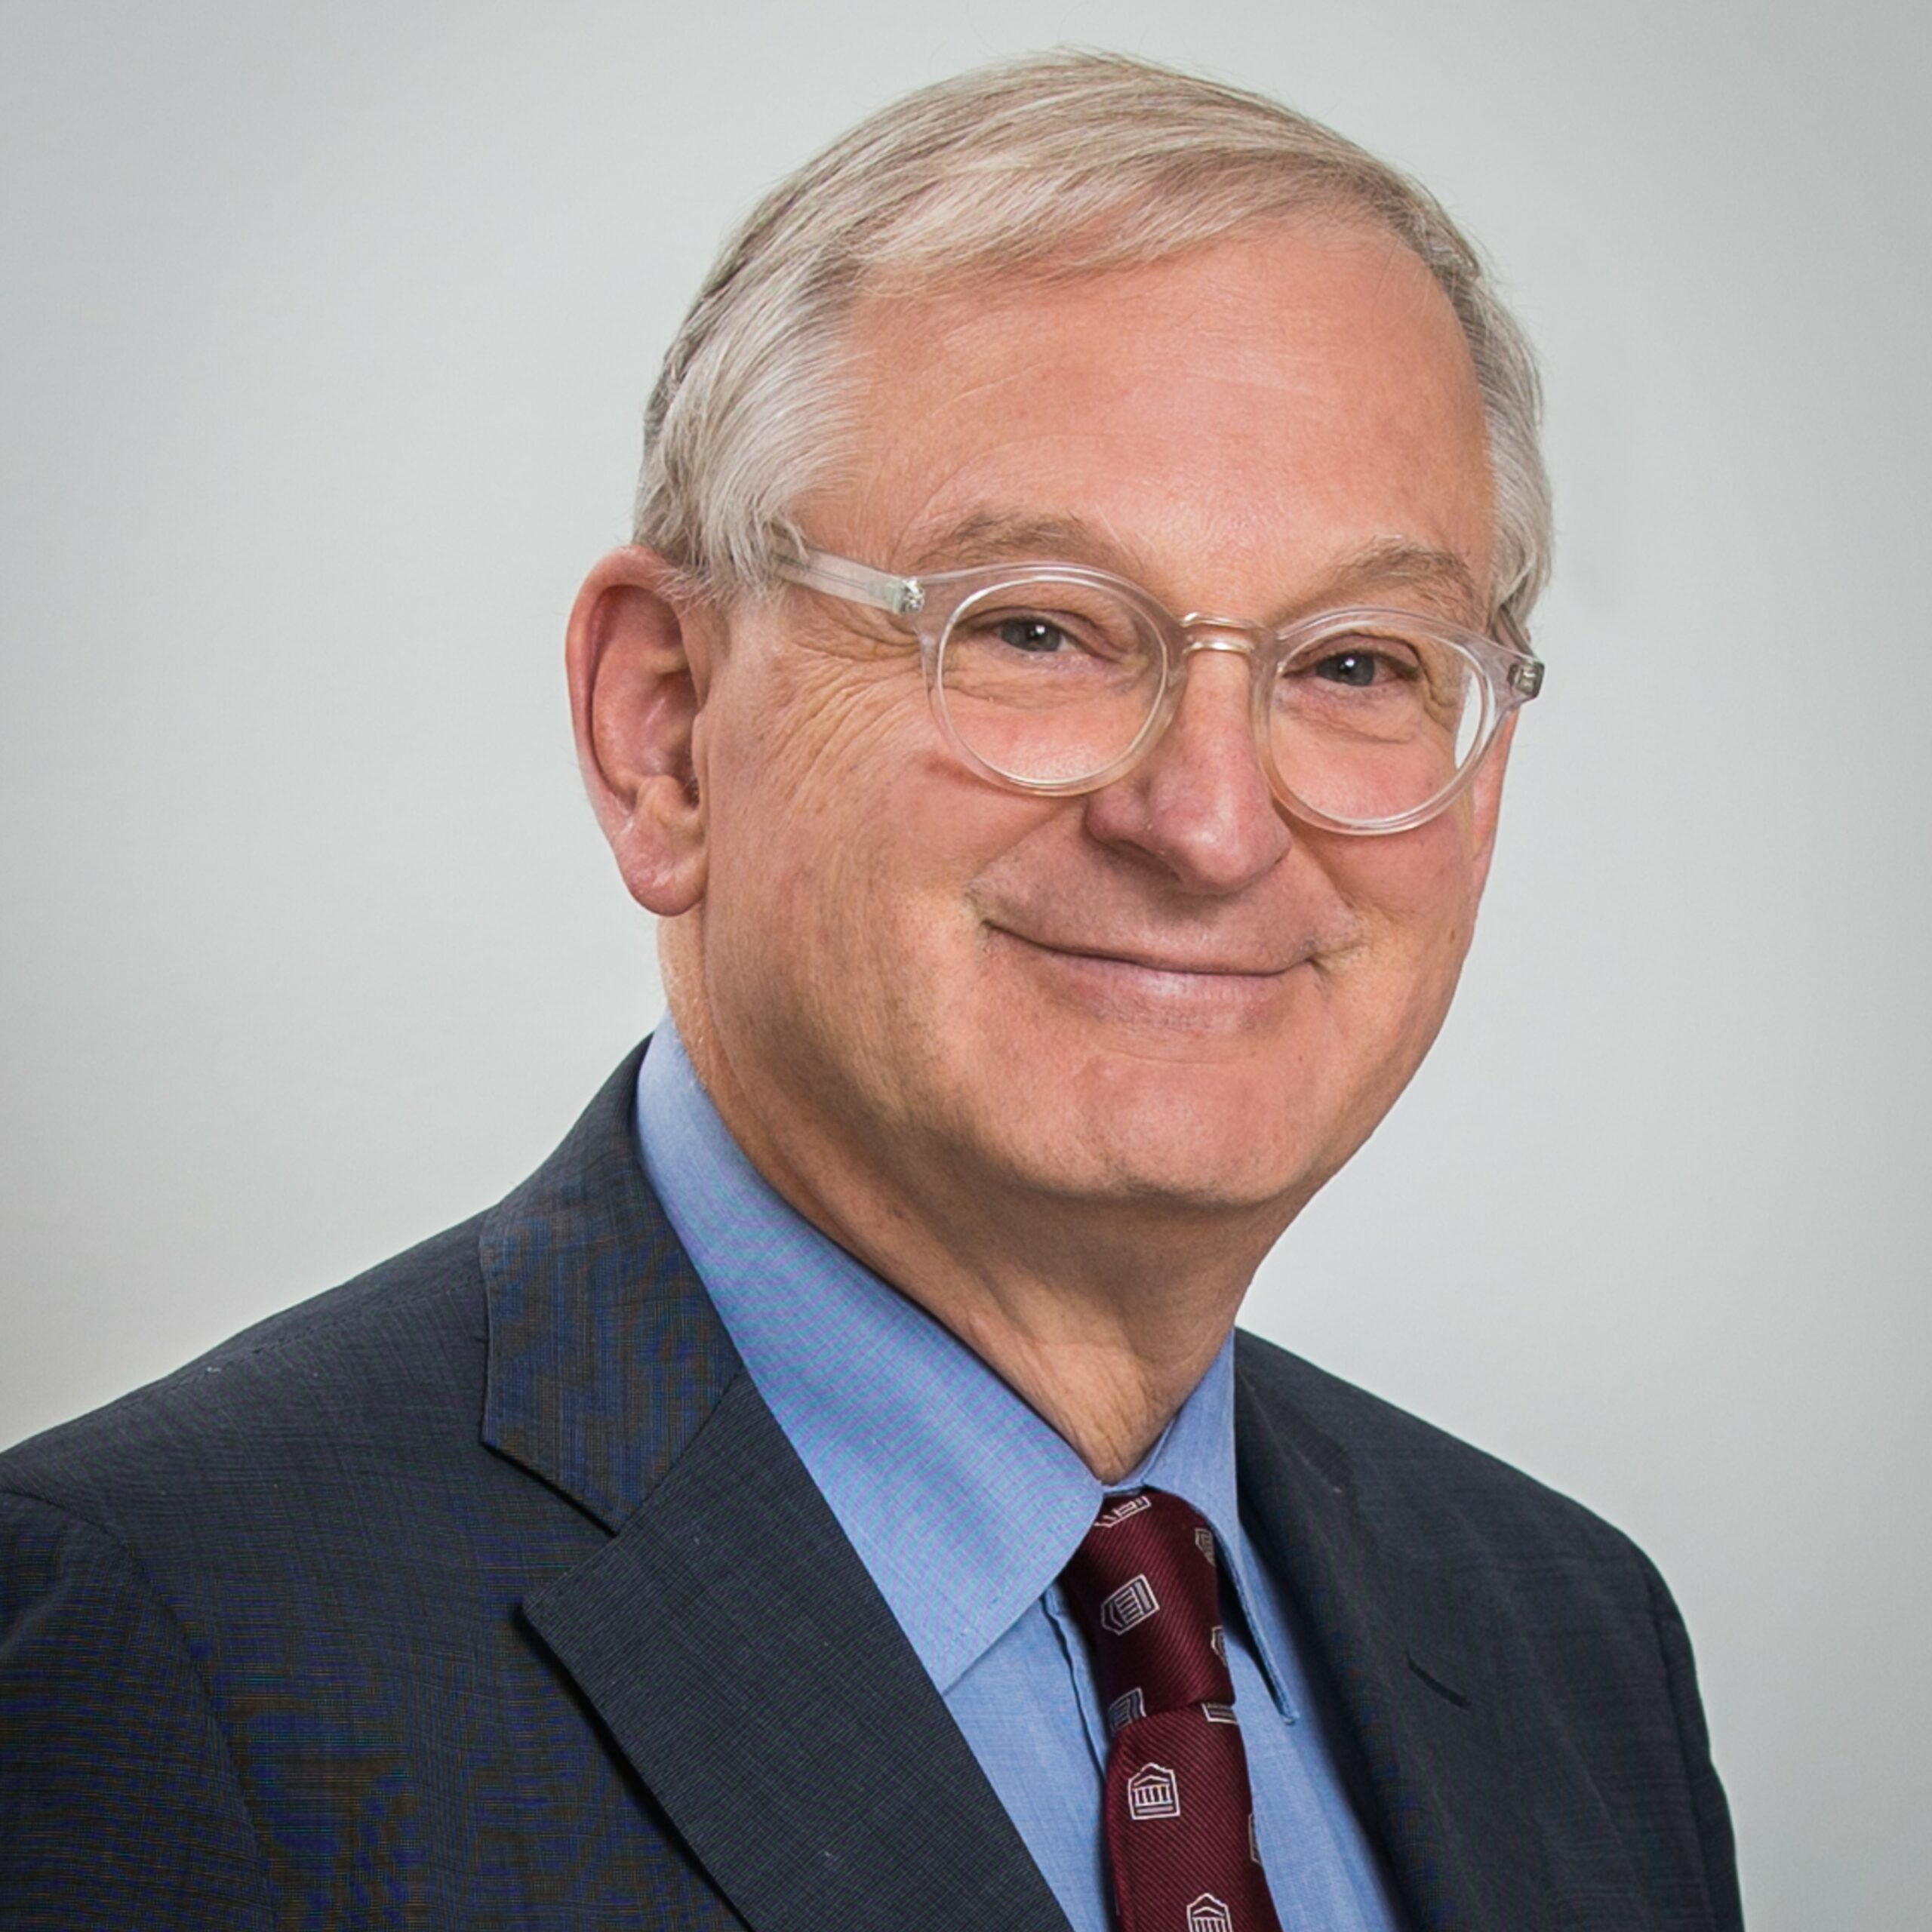 <hr></hr>Jacques Frémont
<br>President and Vice-Chancellor
<br>University of Ottawa